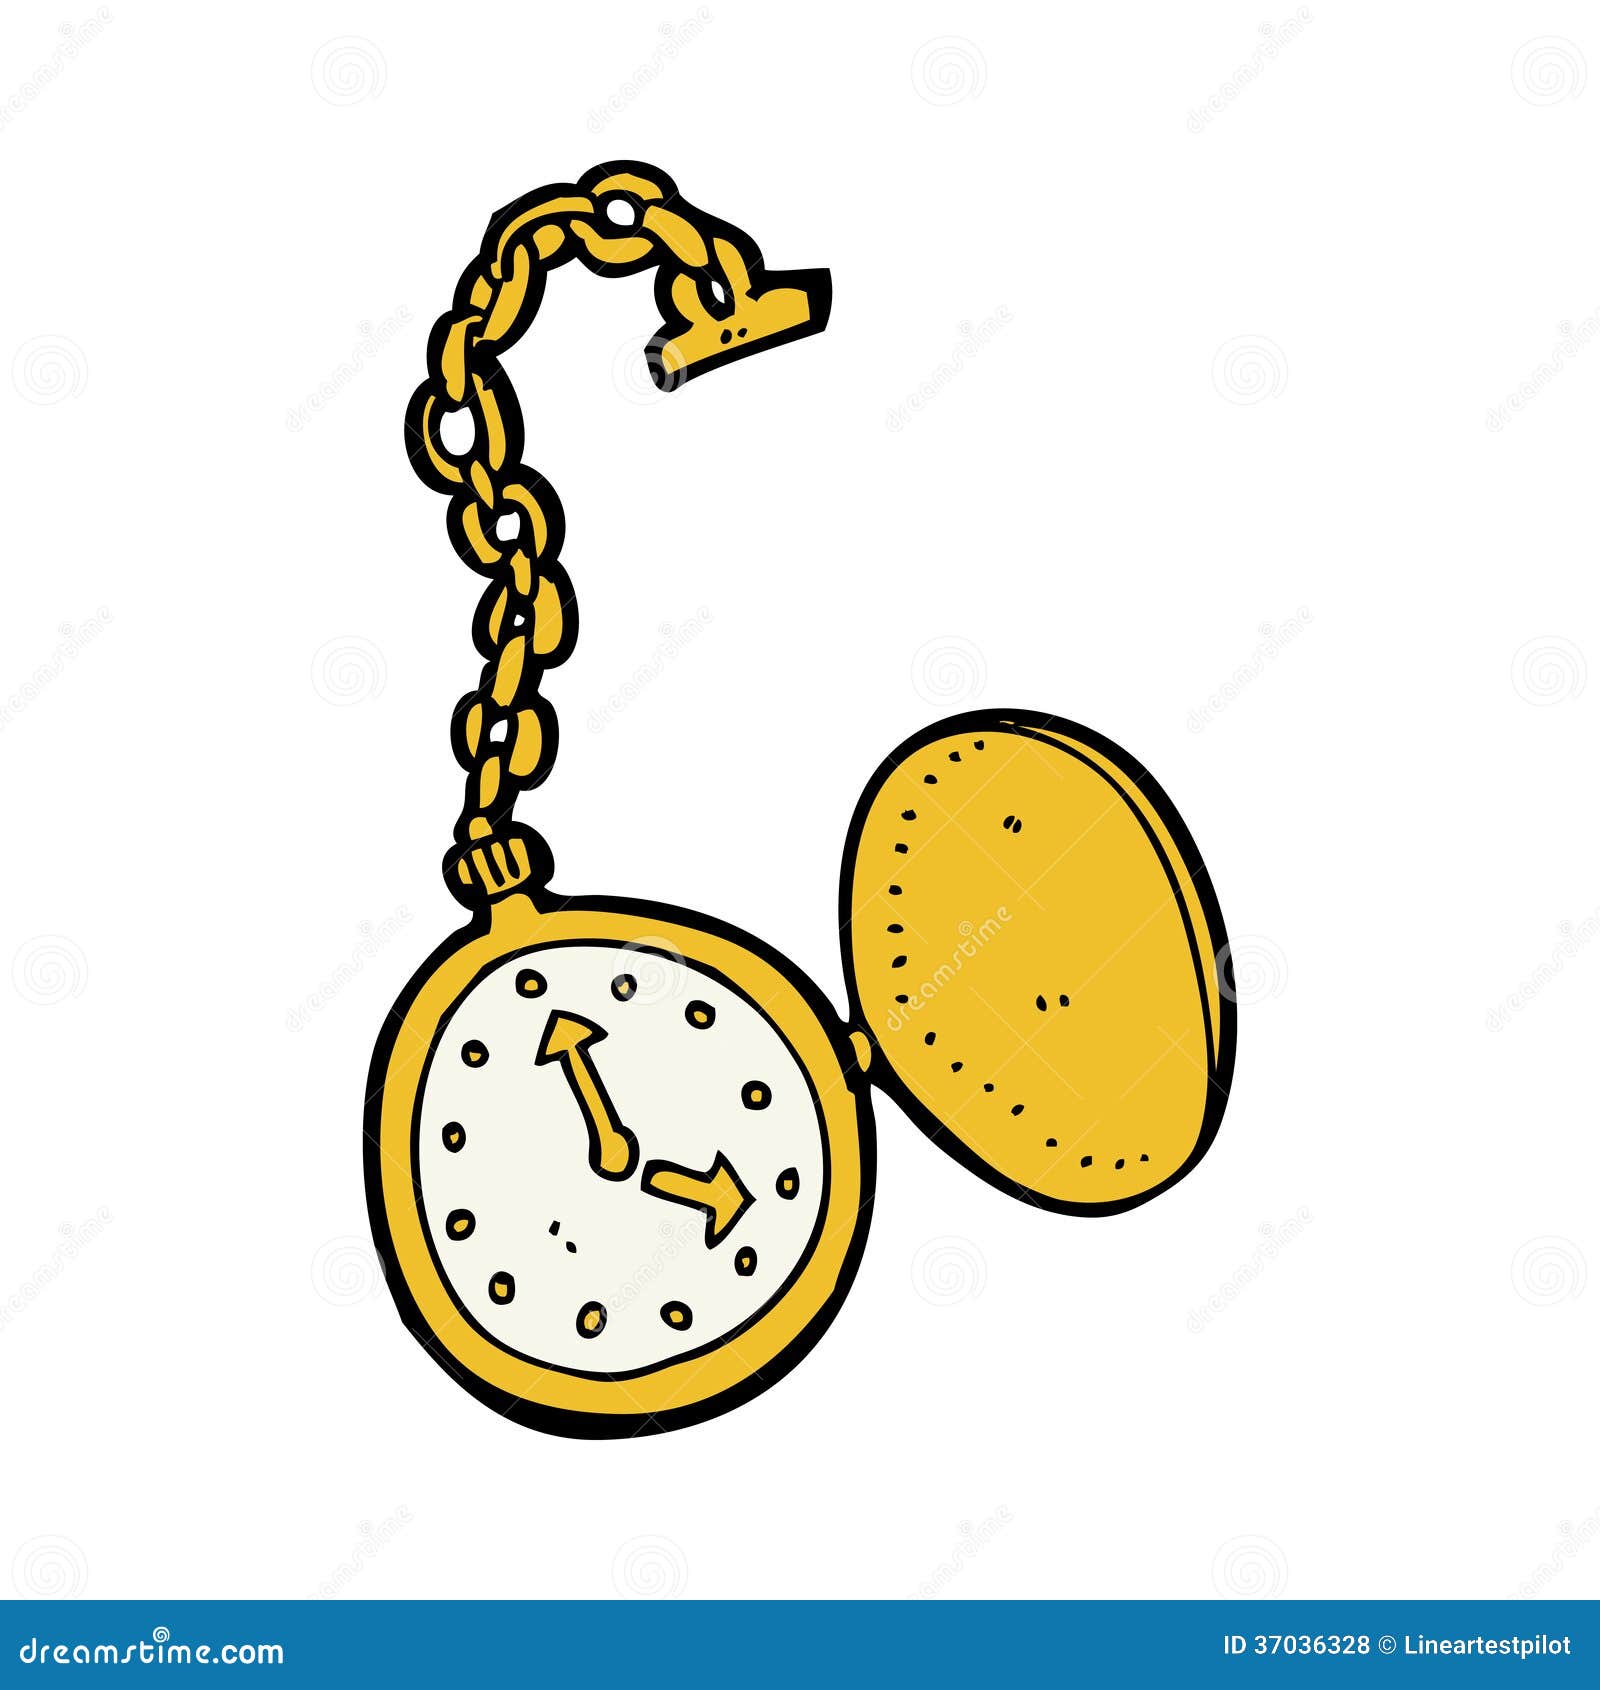 funny watches clipart - photo #11